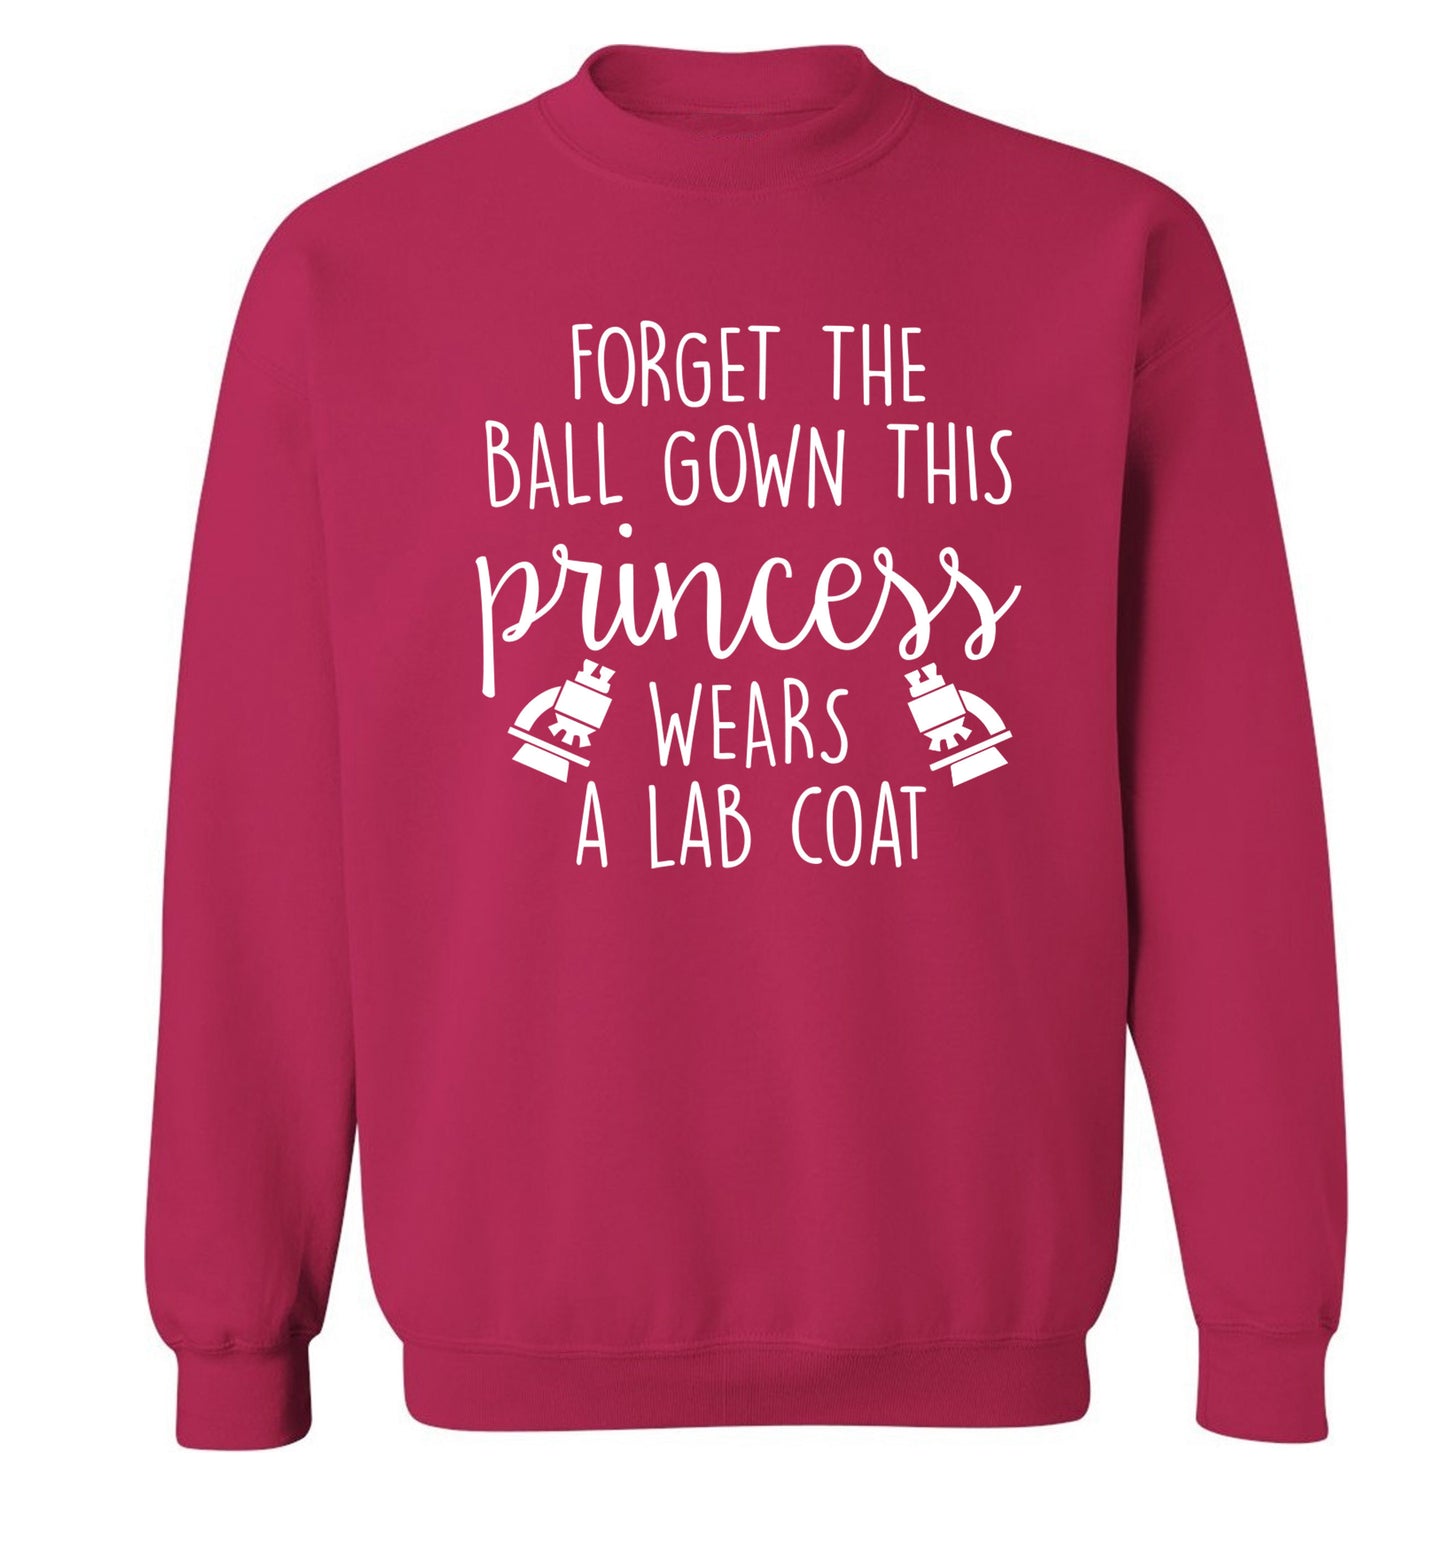 Forget the ball gown this princess wears a lab coat Adult's unisex pink Sweater 2XL